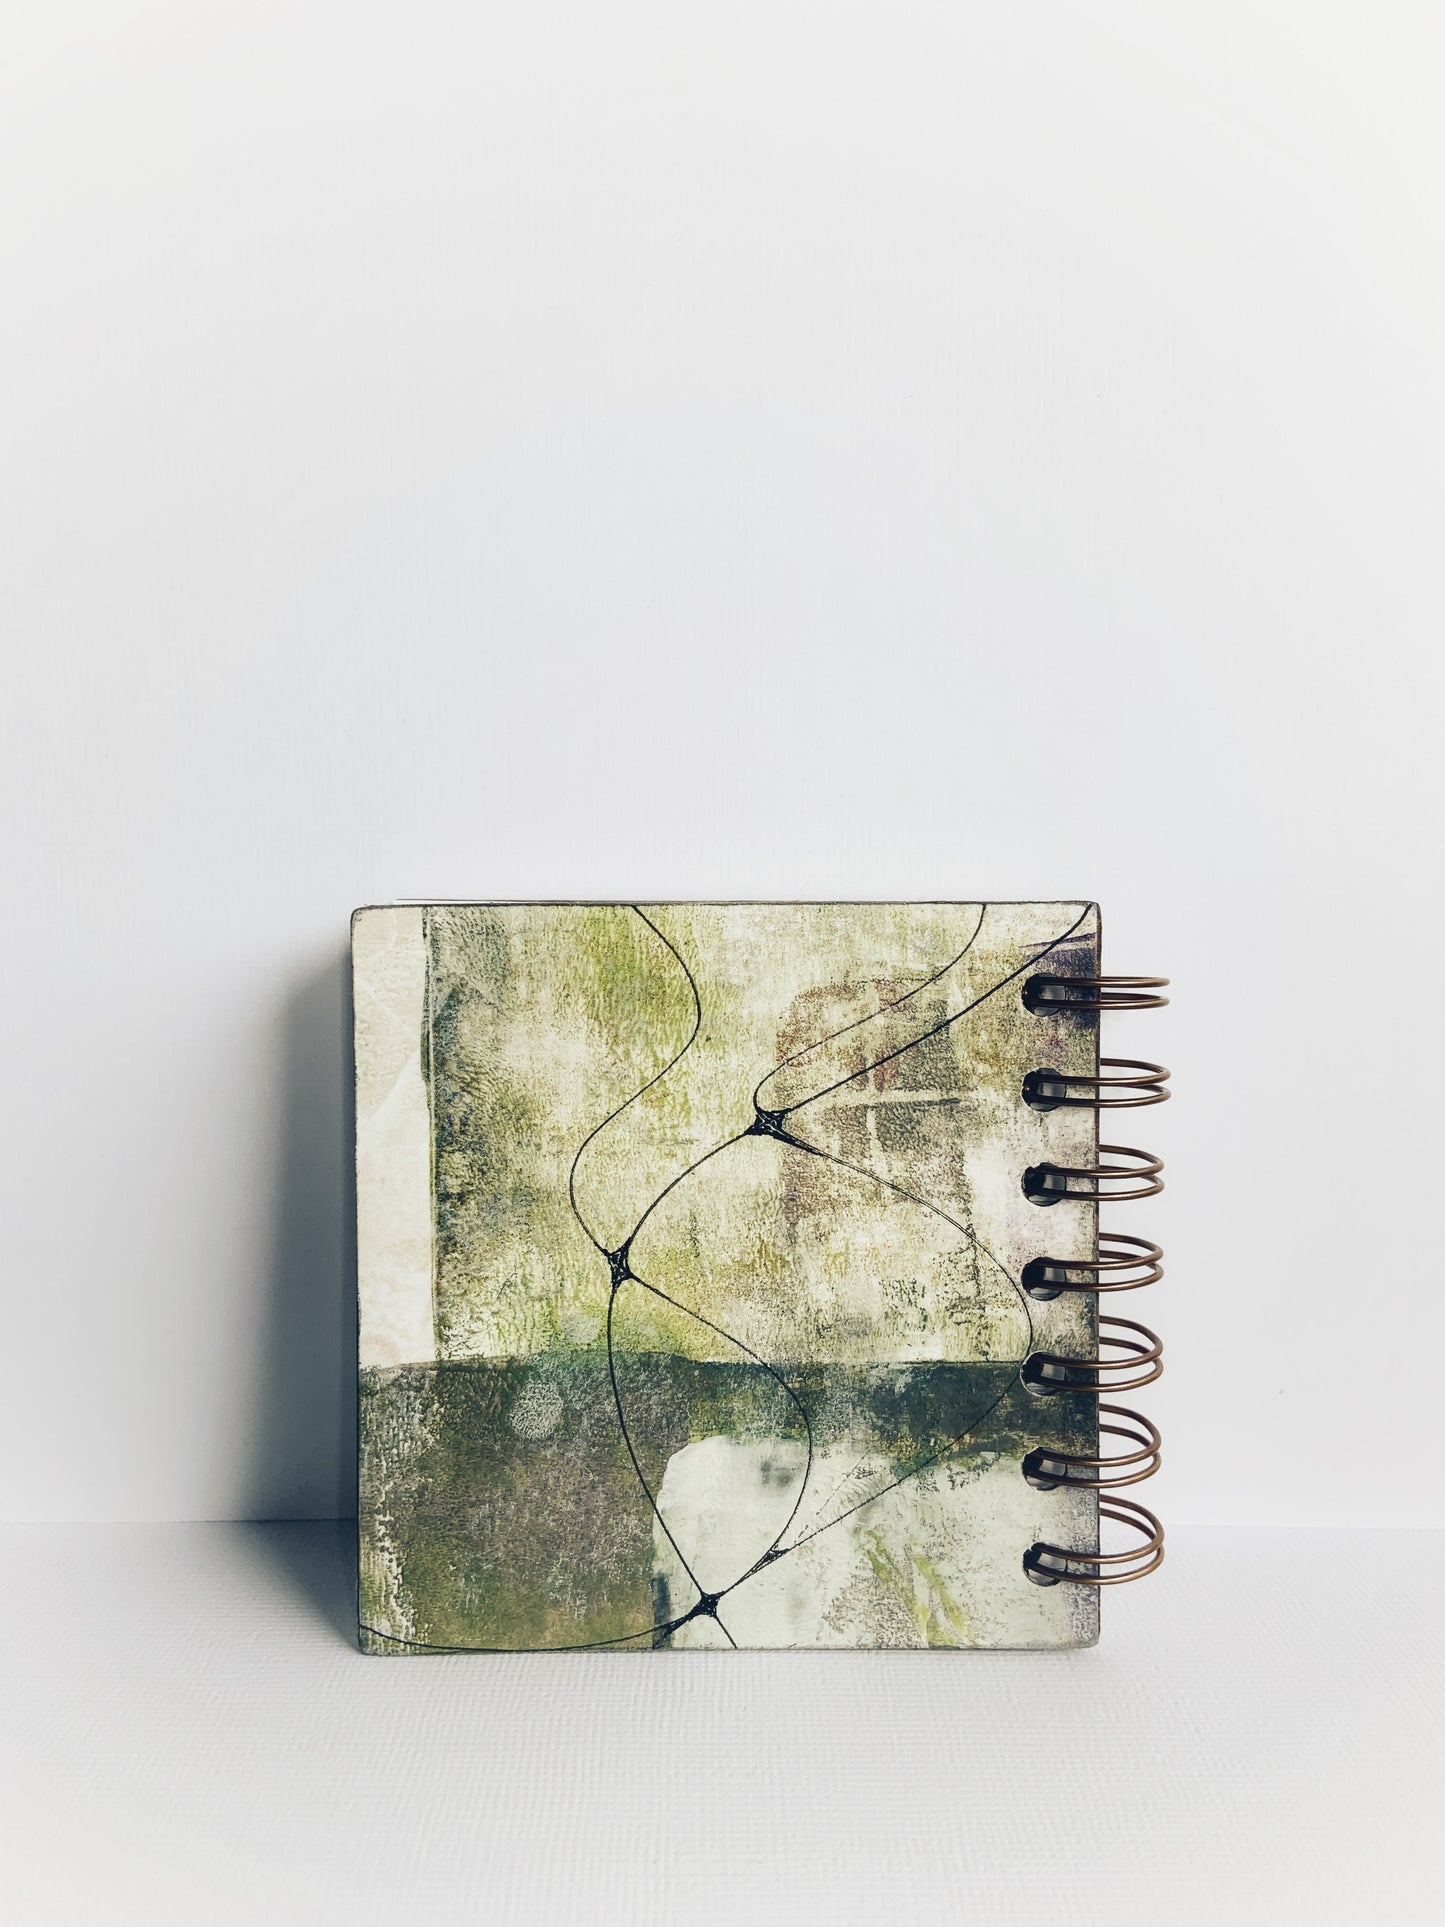 Back page of handmade mini hardcover journal painted in greens and greys with fine black neurographic lines